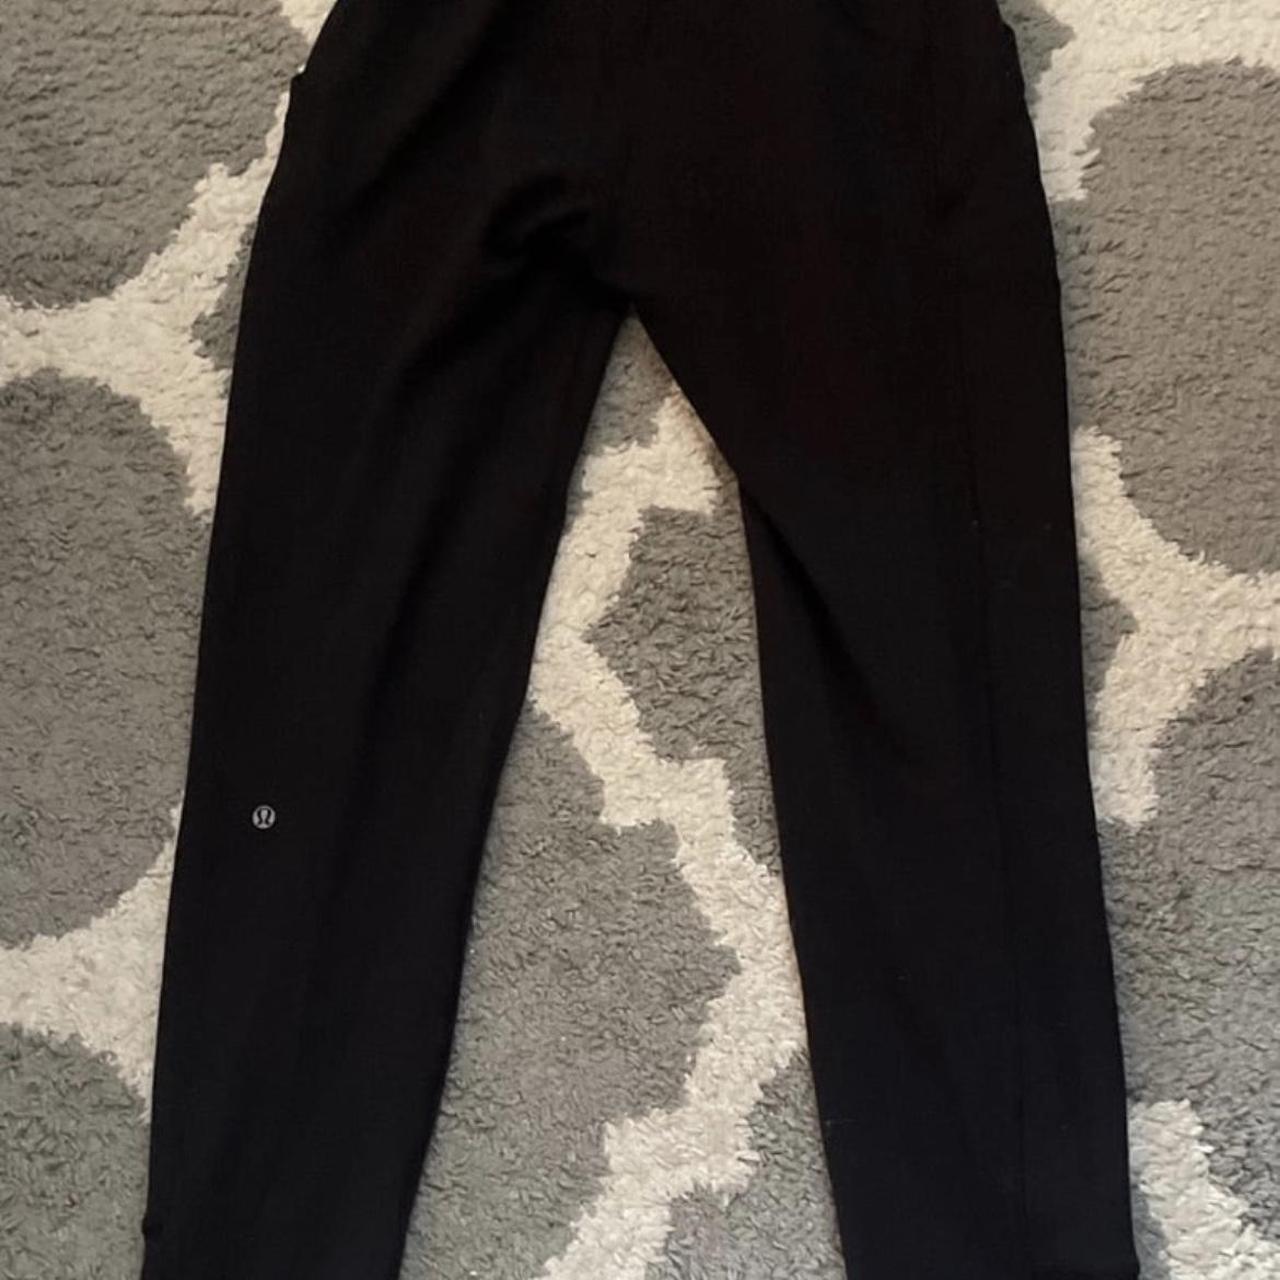 Women’s Lululemon pants, size 6. There is a very